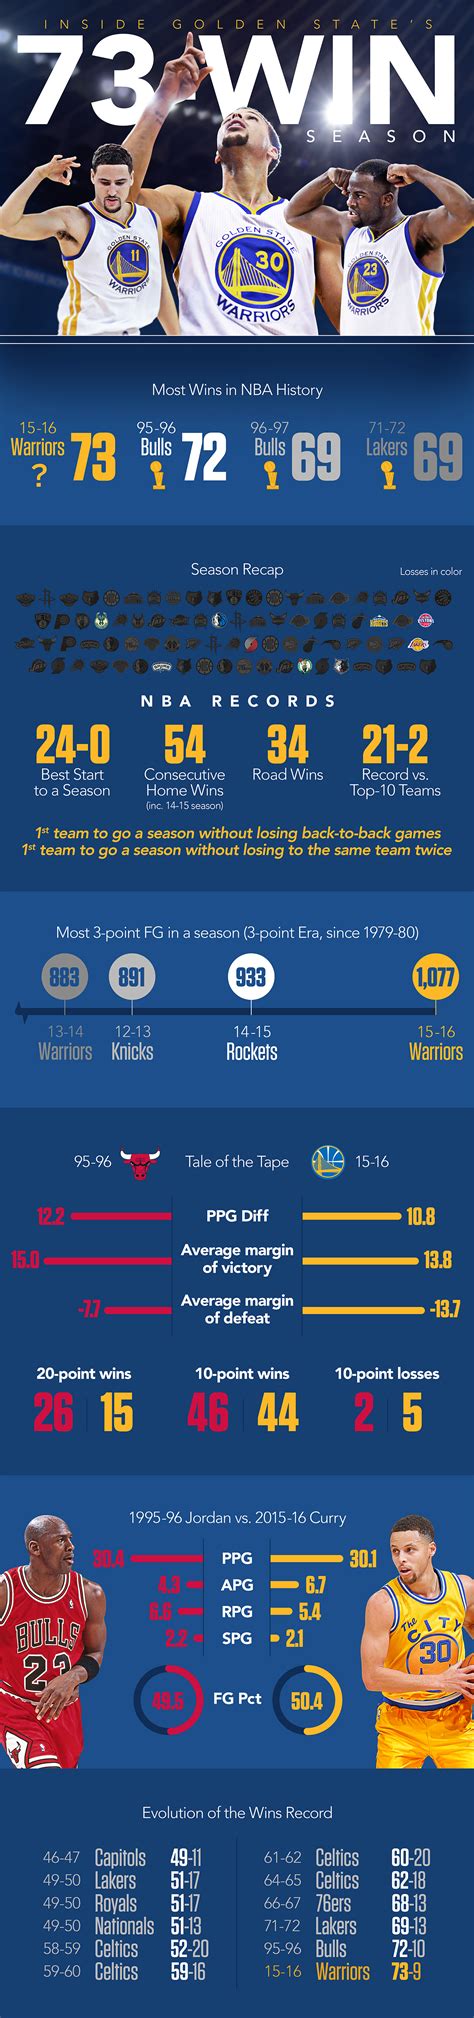 golden state warriors live stats